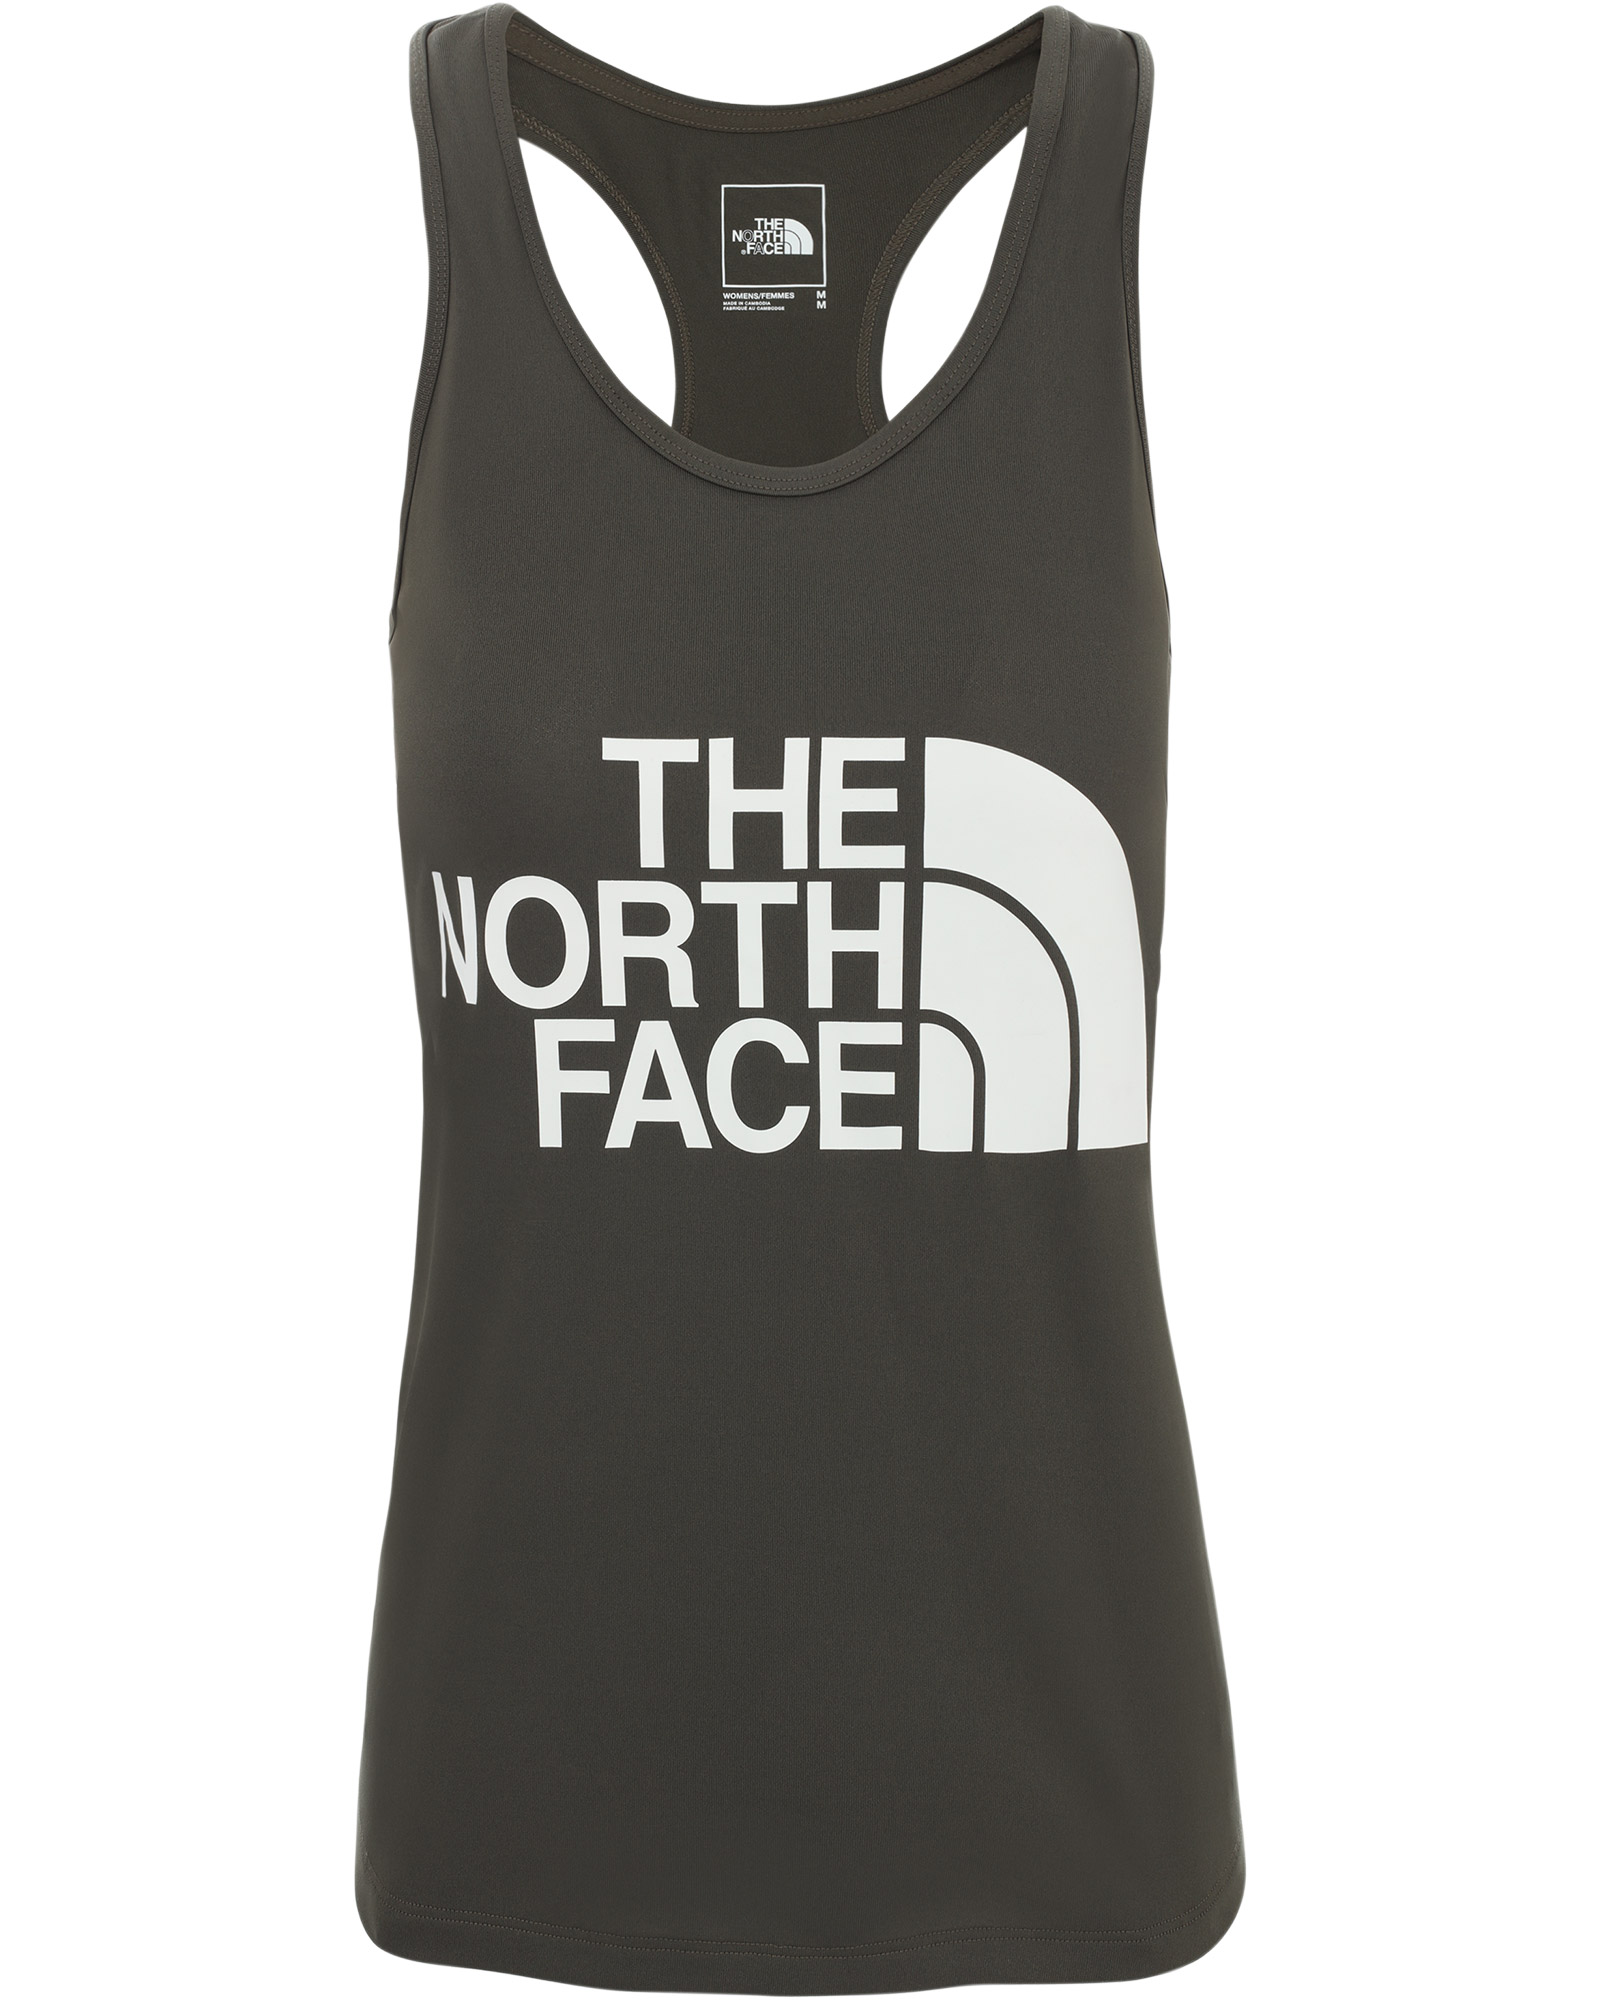 The North Face Graphic Play Hard Women’s Tank - New Taupe Green XS